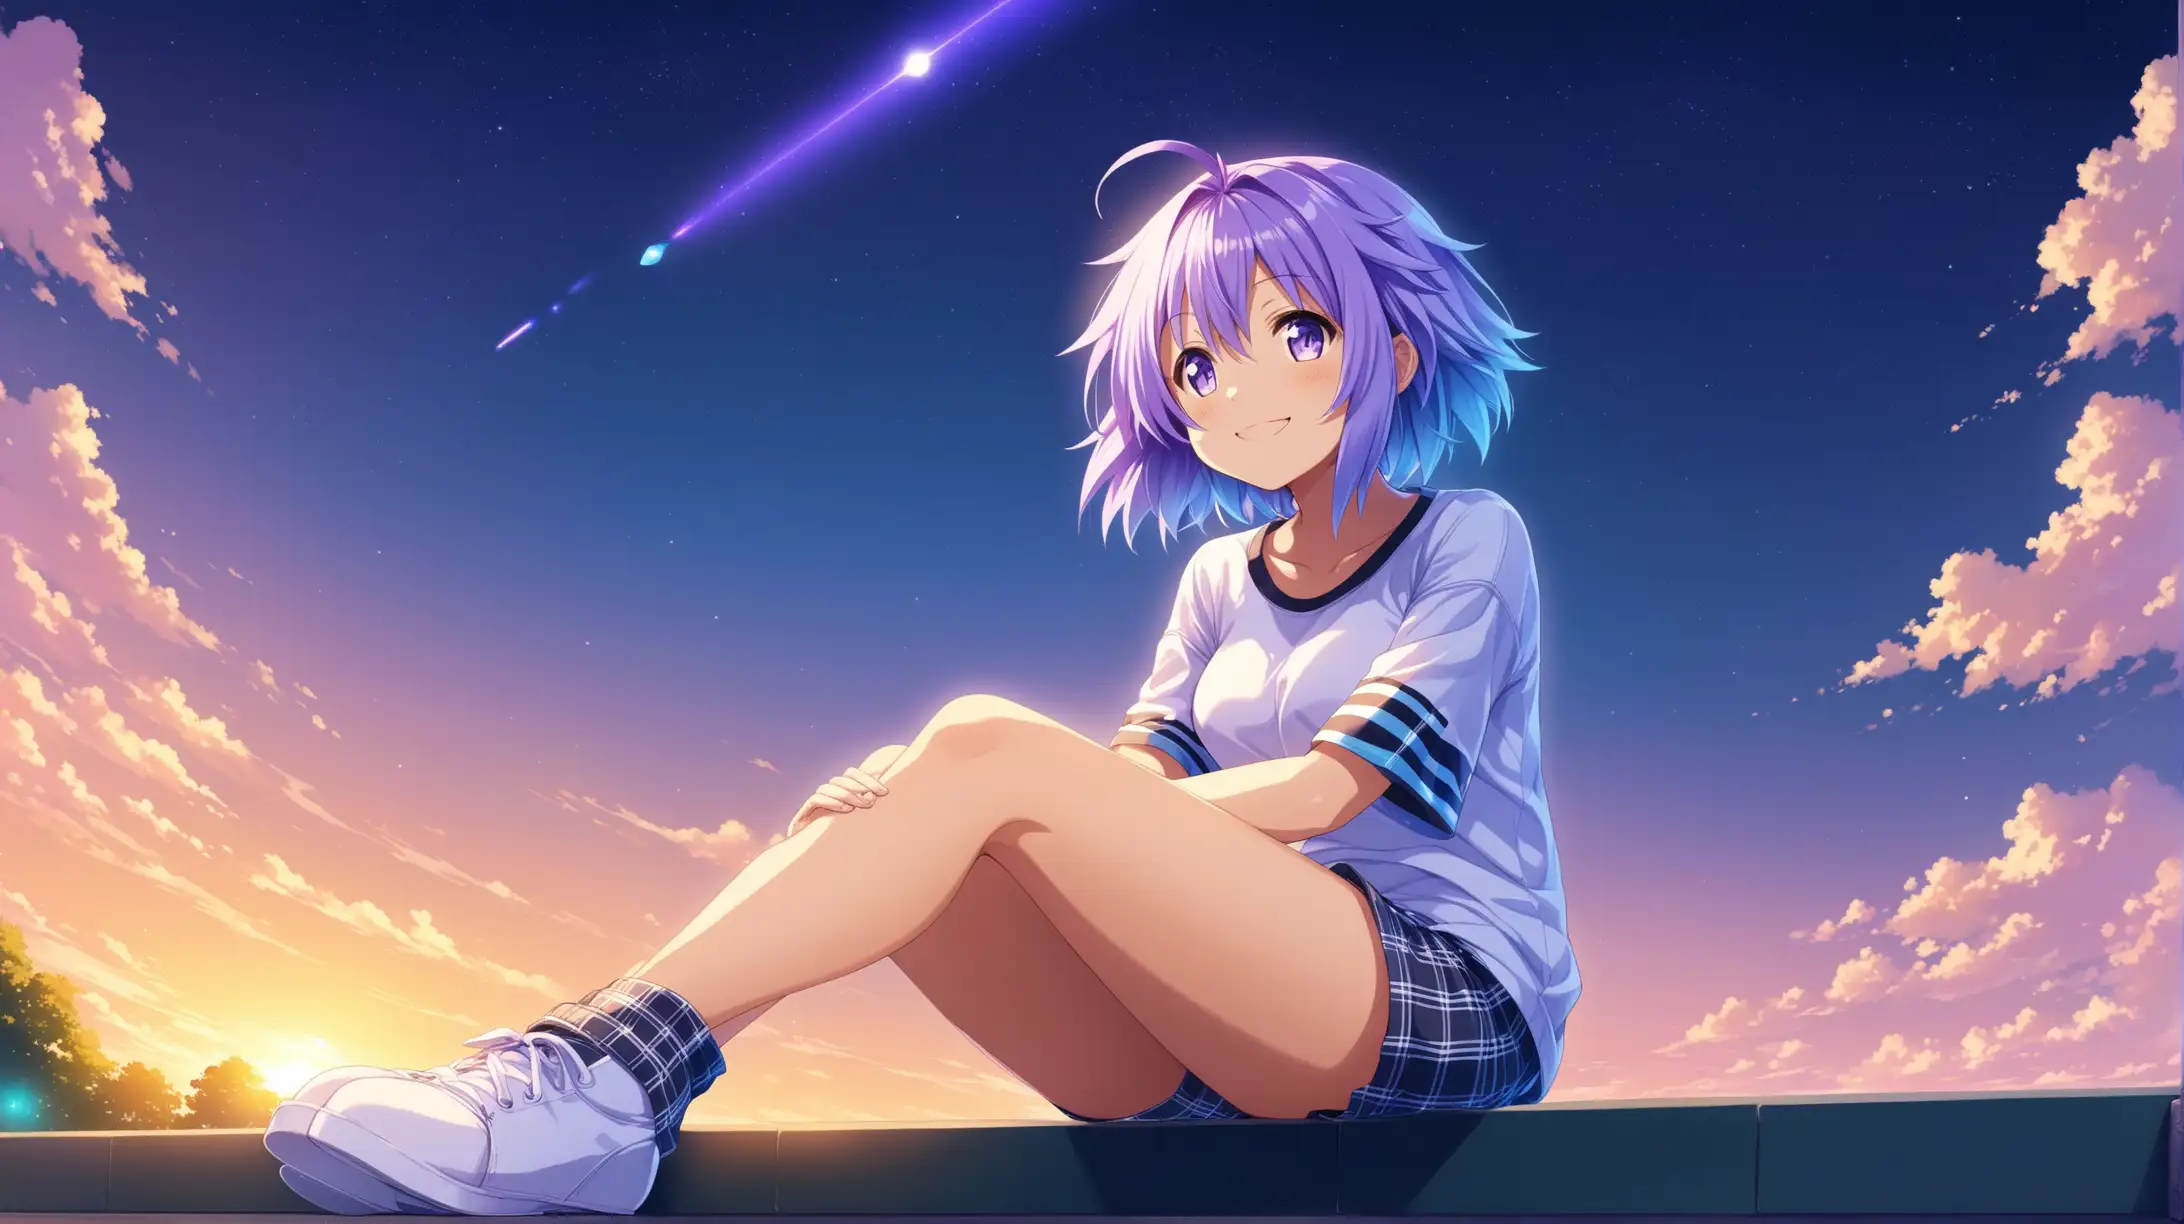 Neptune from Hyperdimension Neptunia Sitting Outdoors with Casual Smile